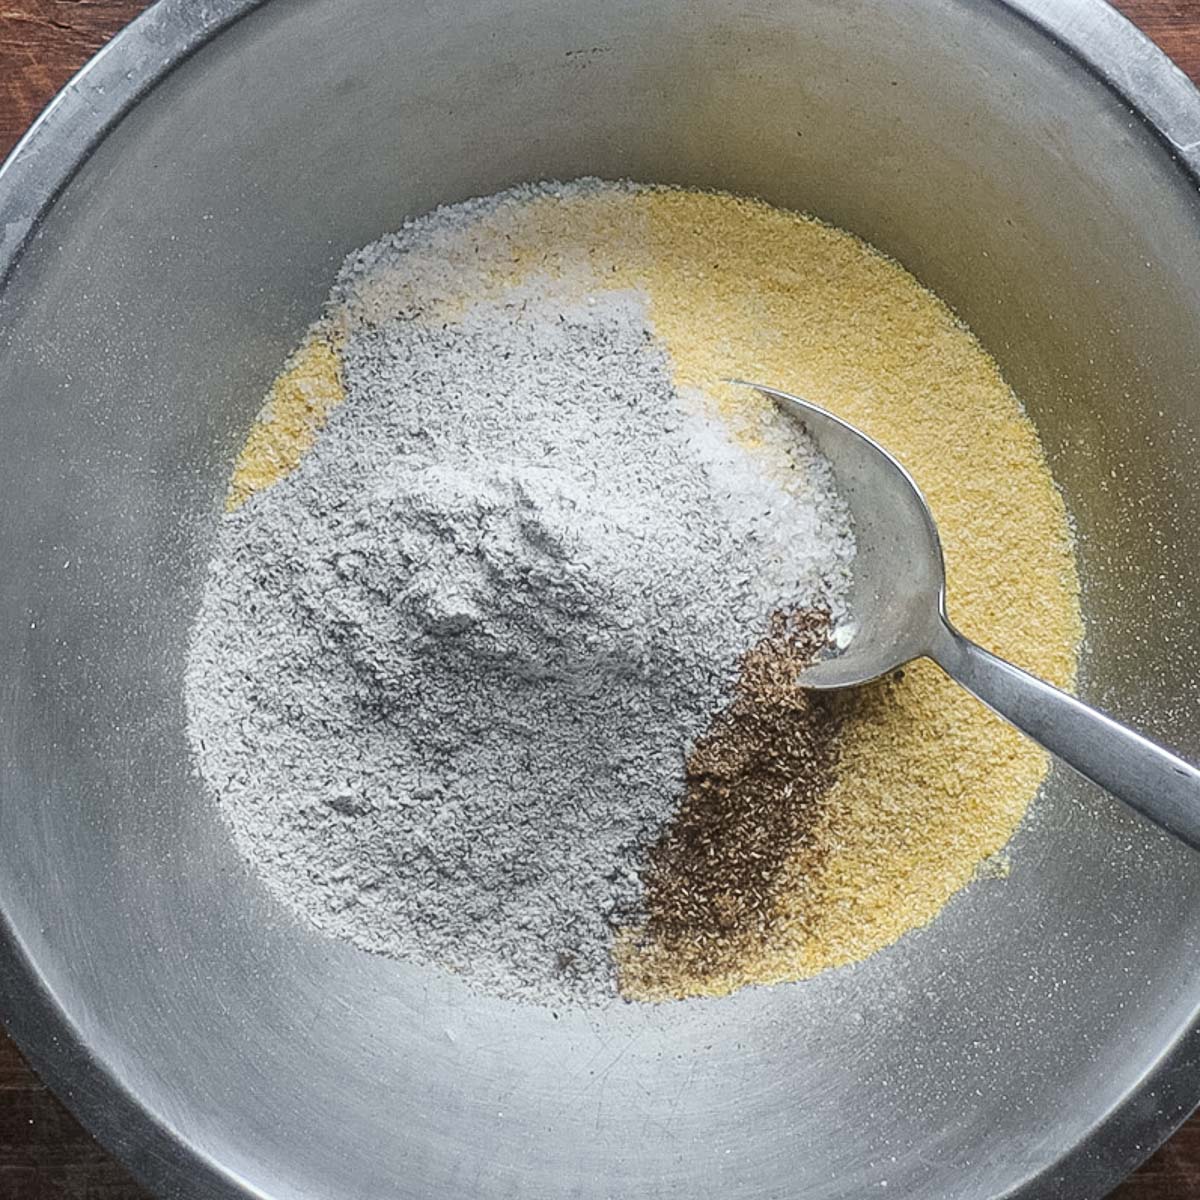 Mixing cornmeal, spices and buckwheat flour.